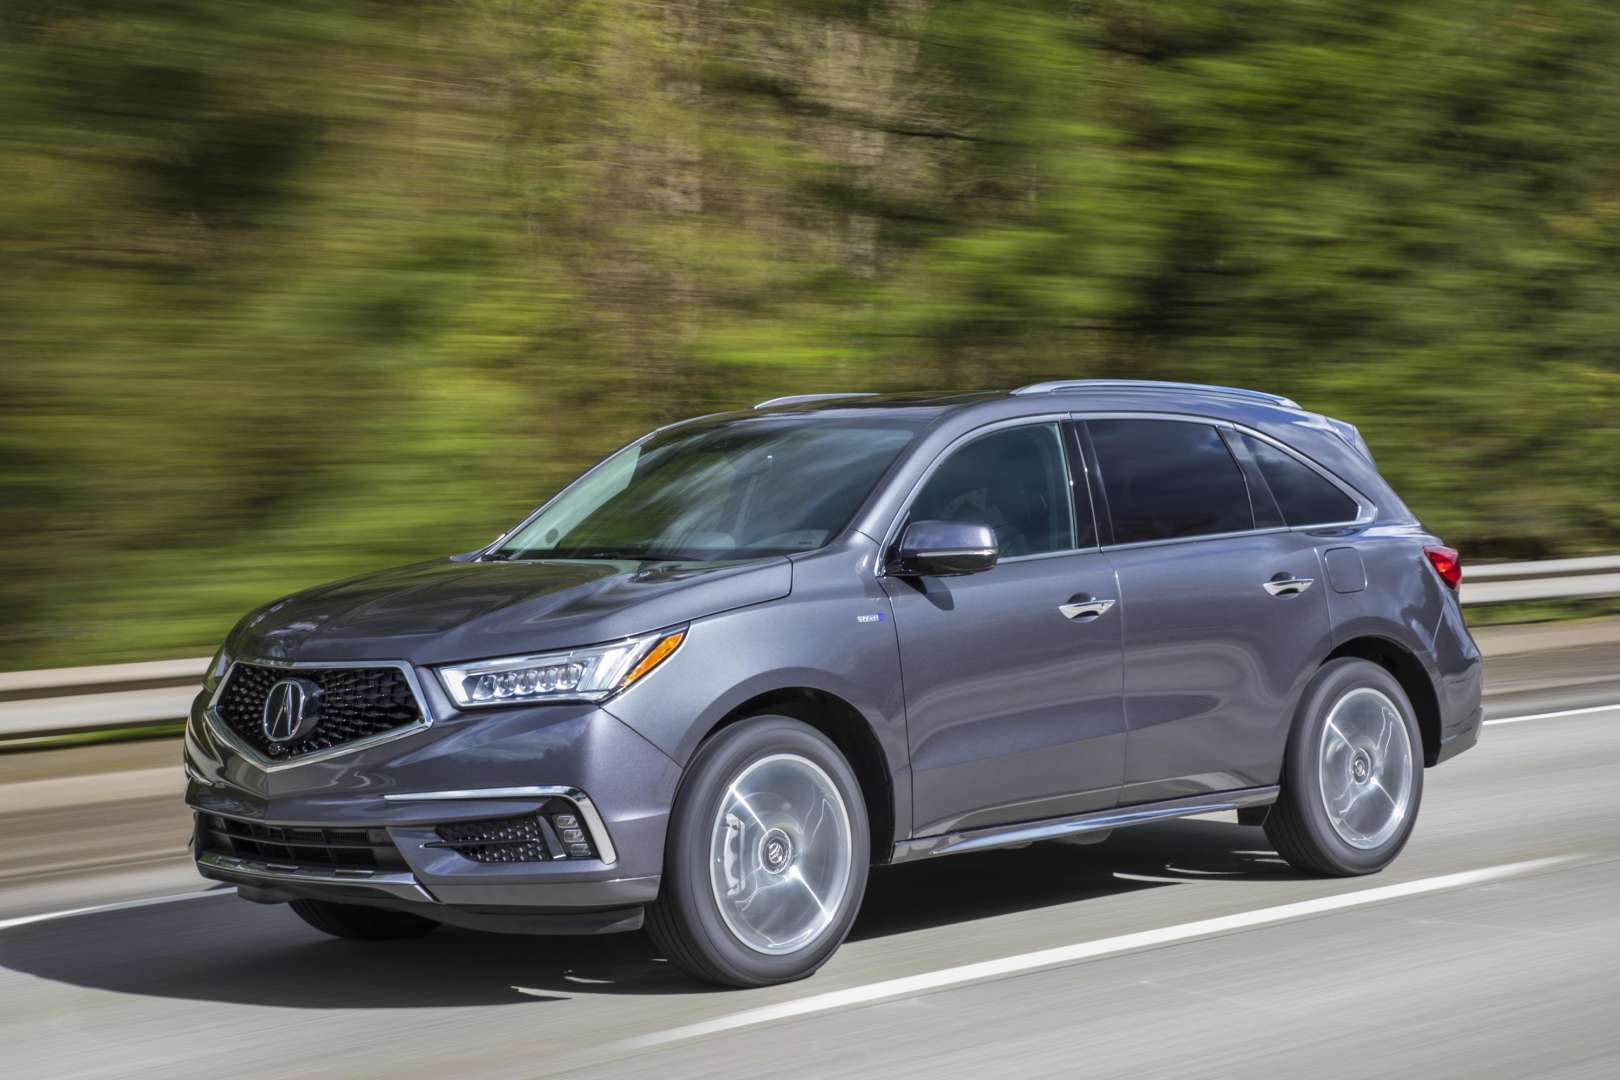 The 2020 Acura MDX remains a great choice for a luxury threerow